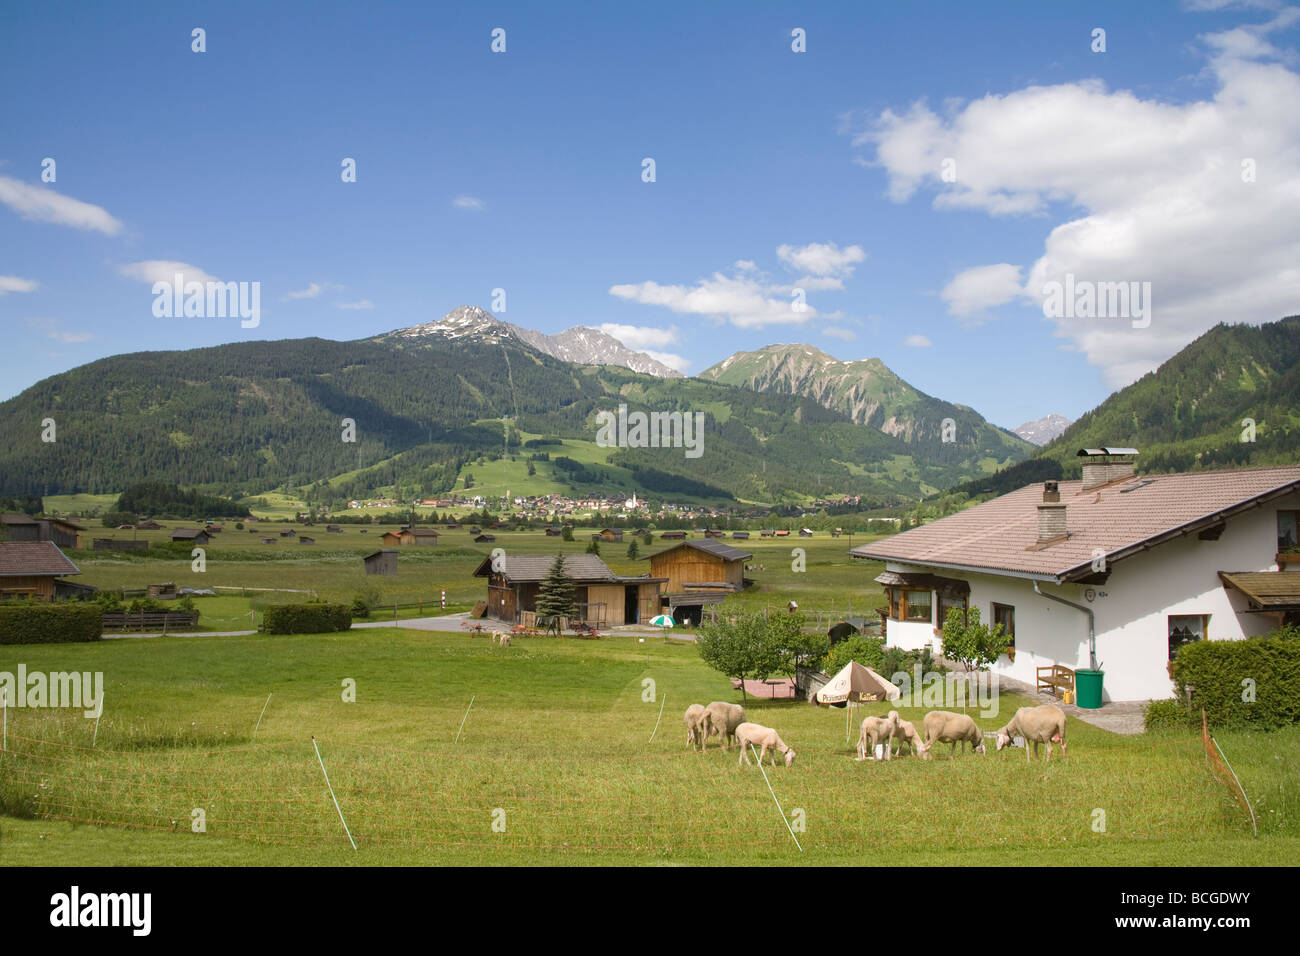 Ehrwald Austria EU May Looking across this ski resort village with a flock of sheep grazing Stock Photo